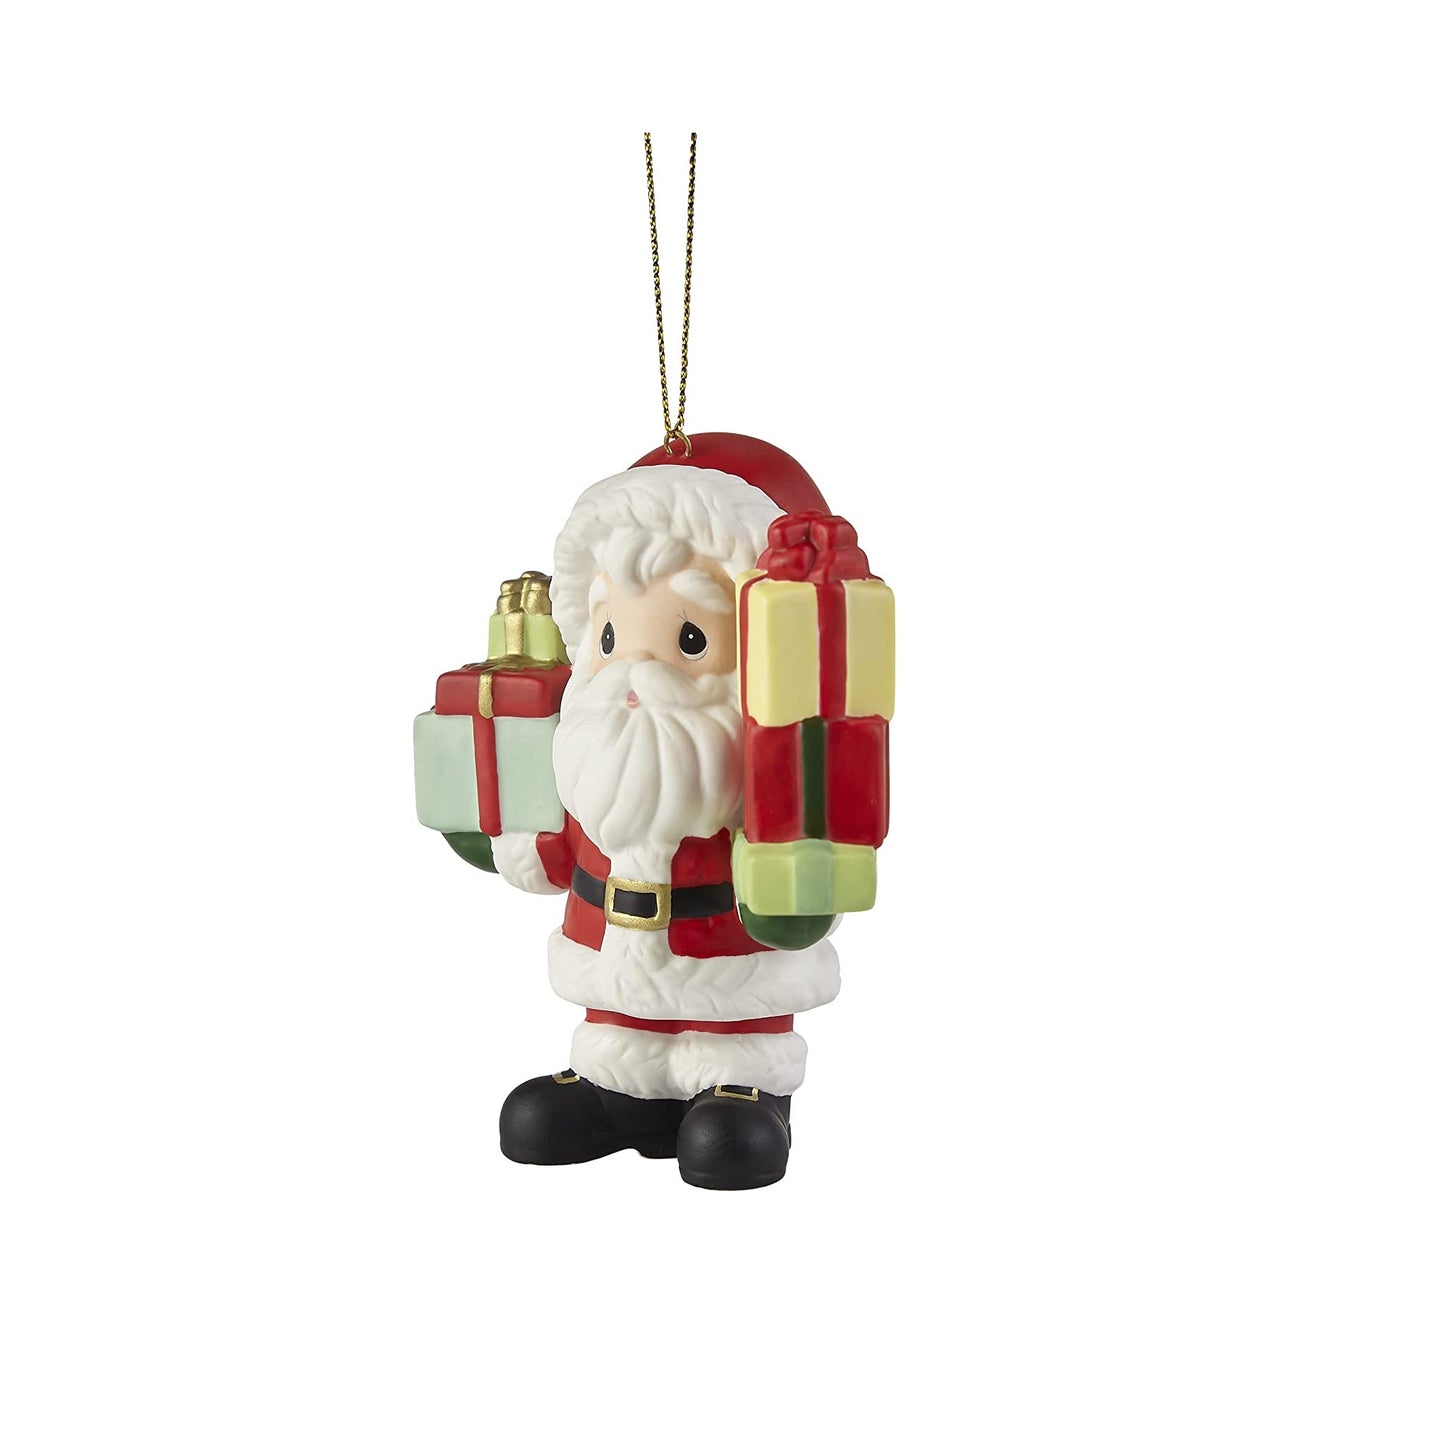 Loaded Up With Christmas Cheer Annual Santa Ornament